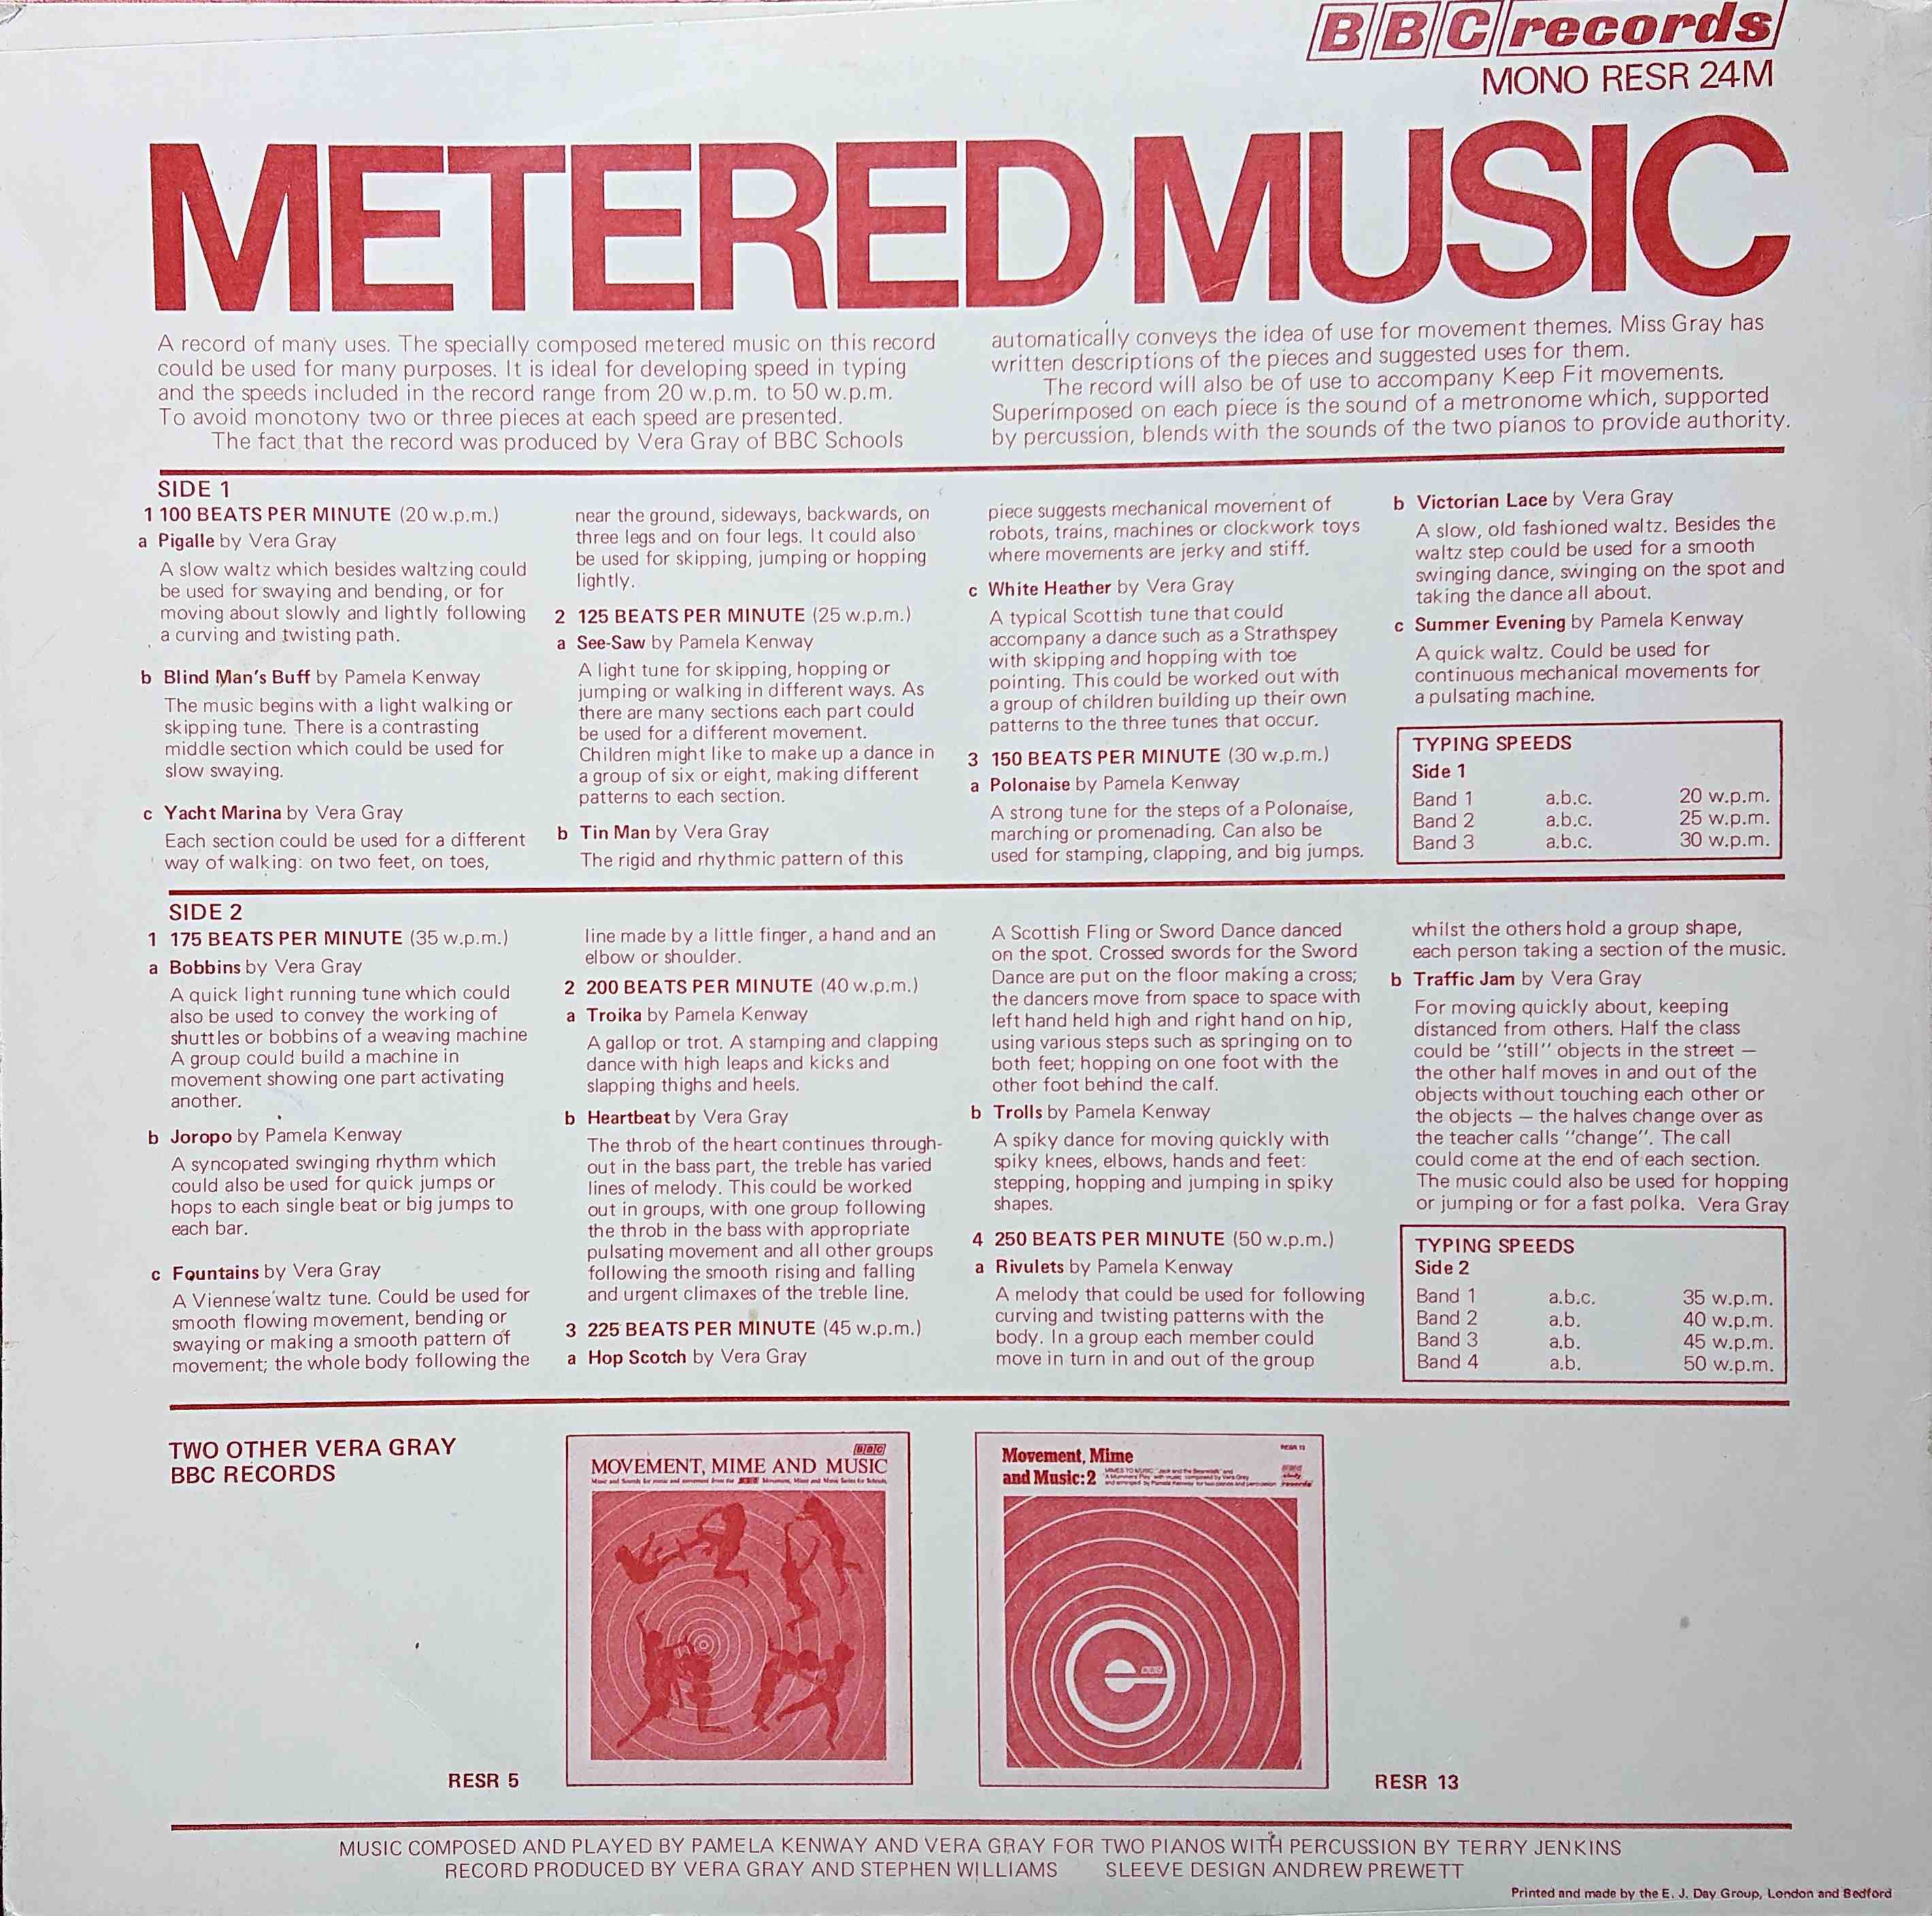 Picture of RESR 24 Metered music by artist Vera Gray / Pamela Kenway from the BBC records and Tapes library